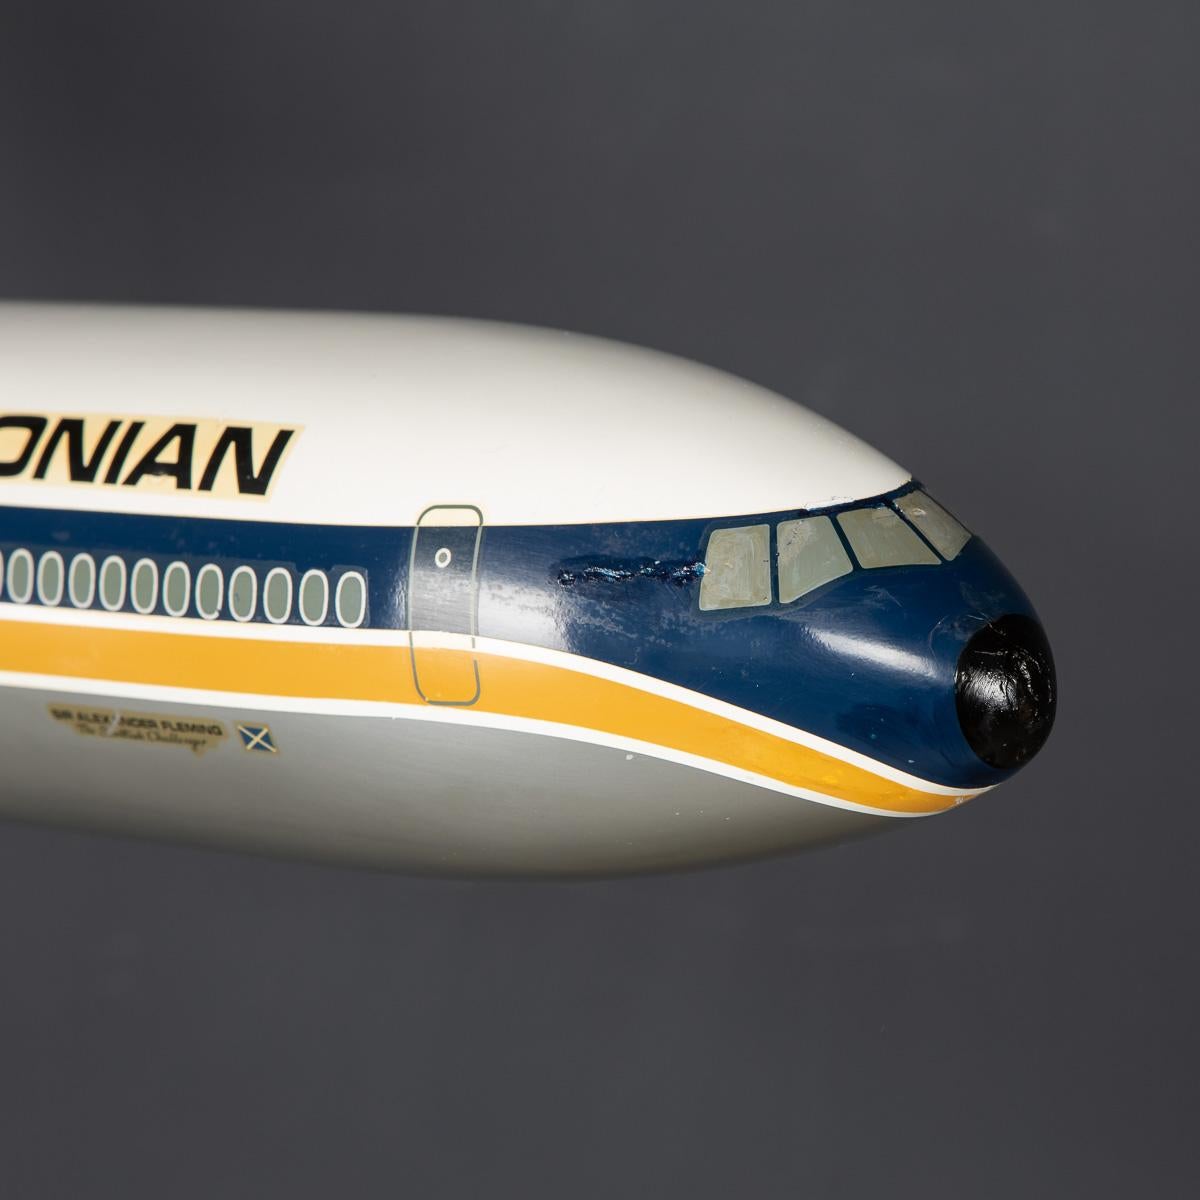 20th Century British Caledonian Dc10 Fibre Glass Airplane Model, c.1970 For Sale 3